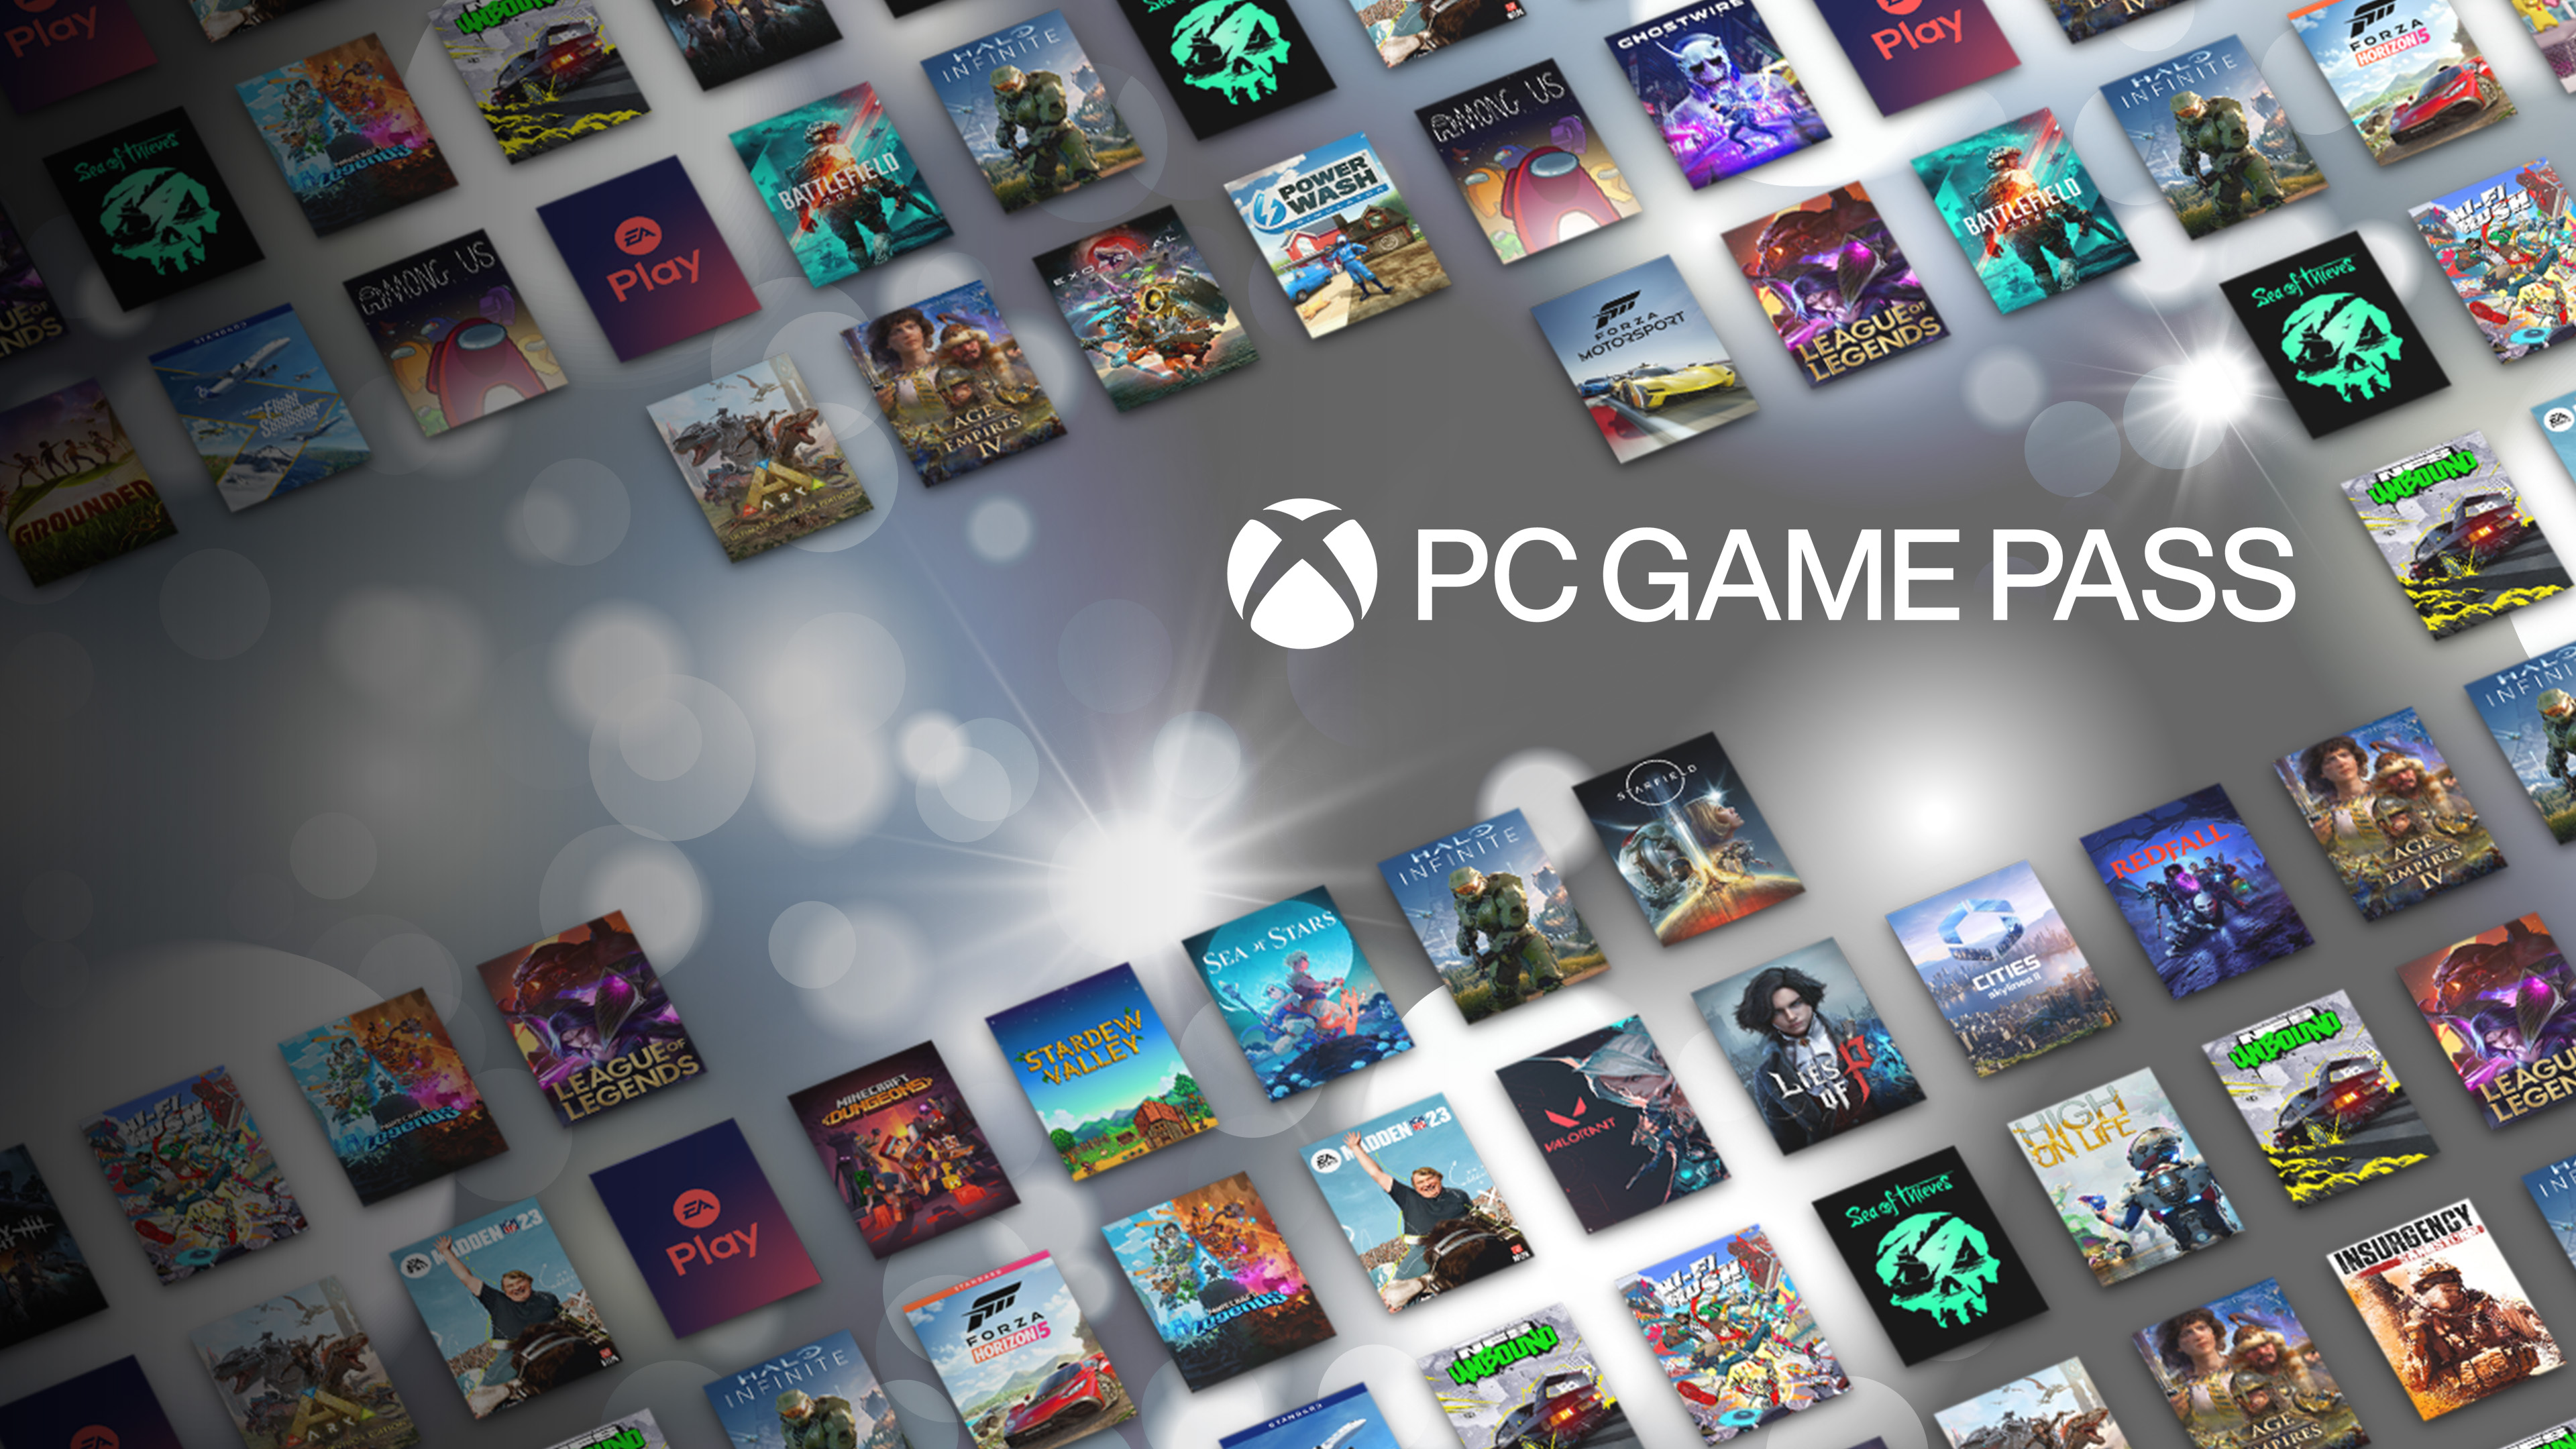 Casual Games Store - Microsoft Apps